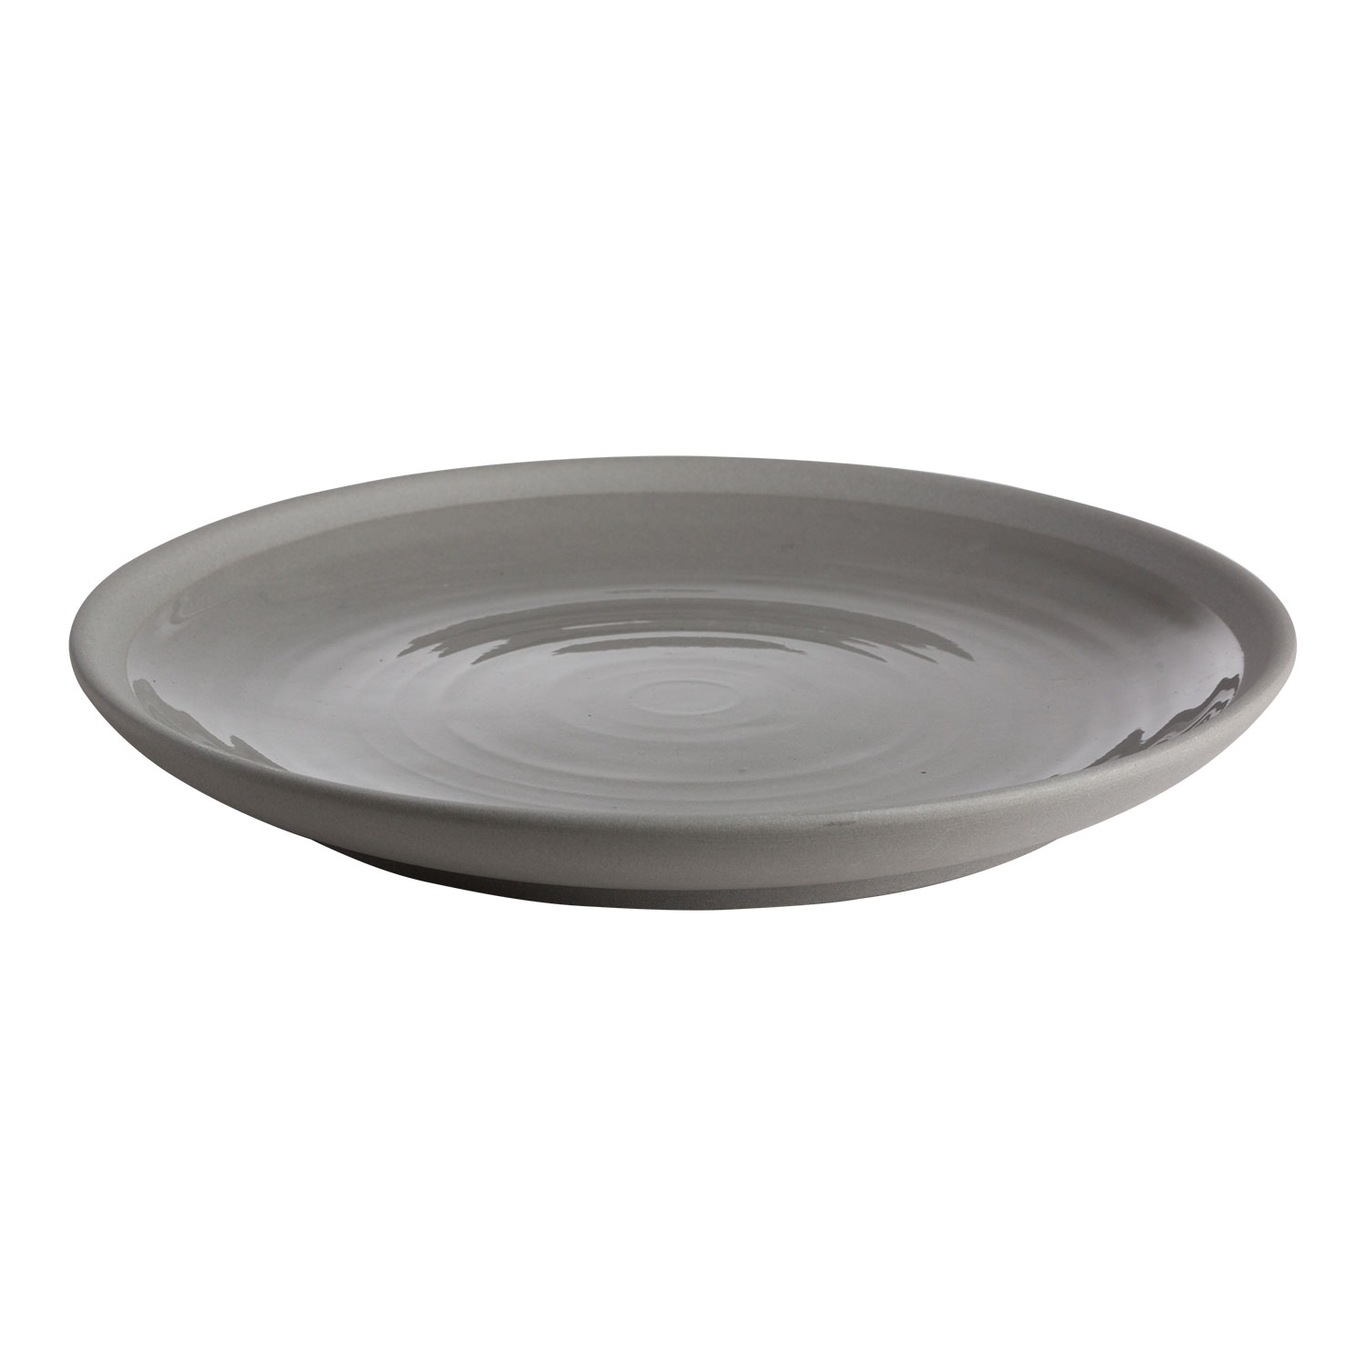 Small Plate 21 cm, Grey